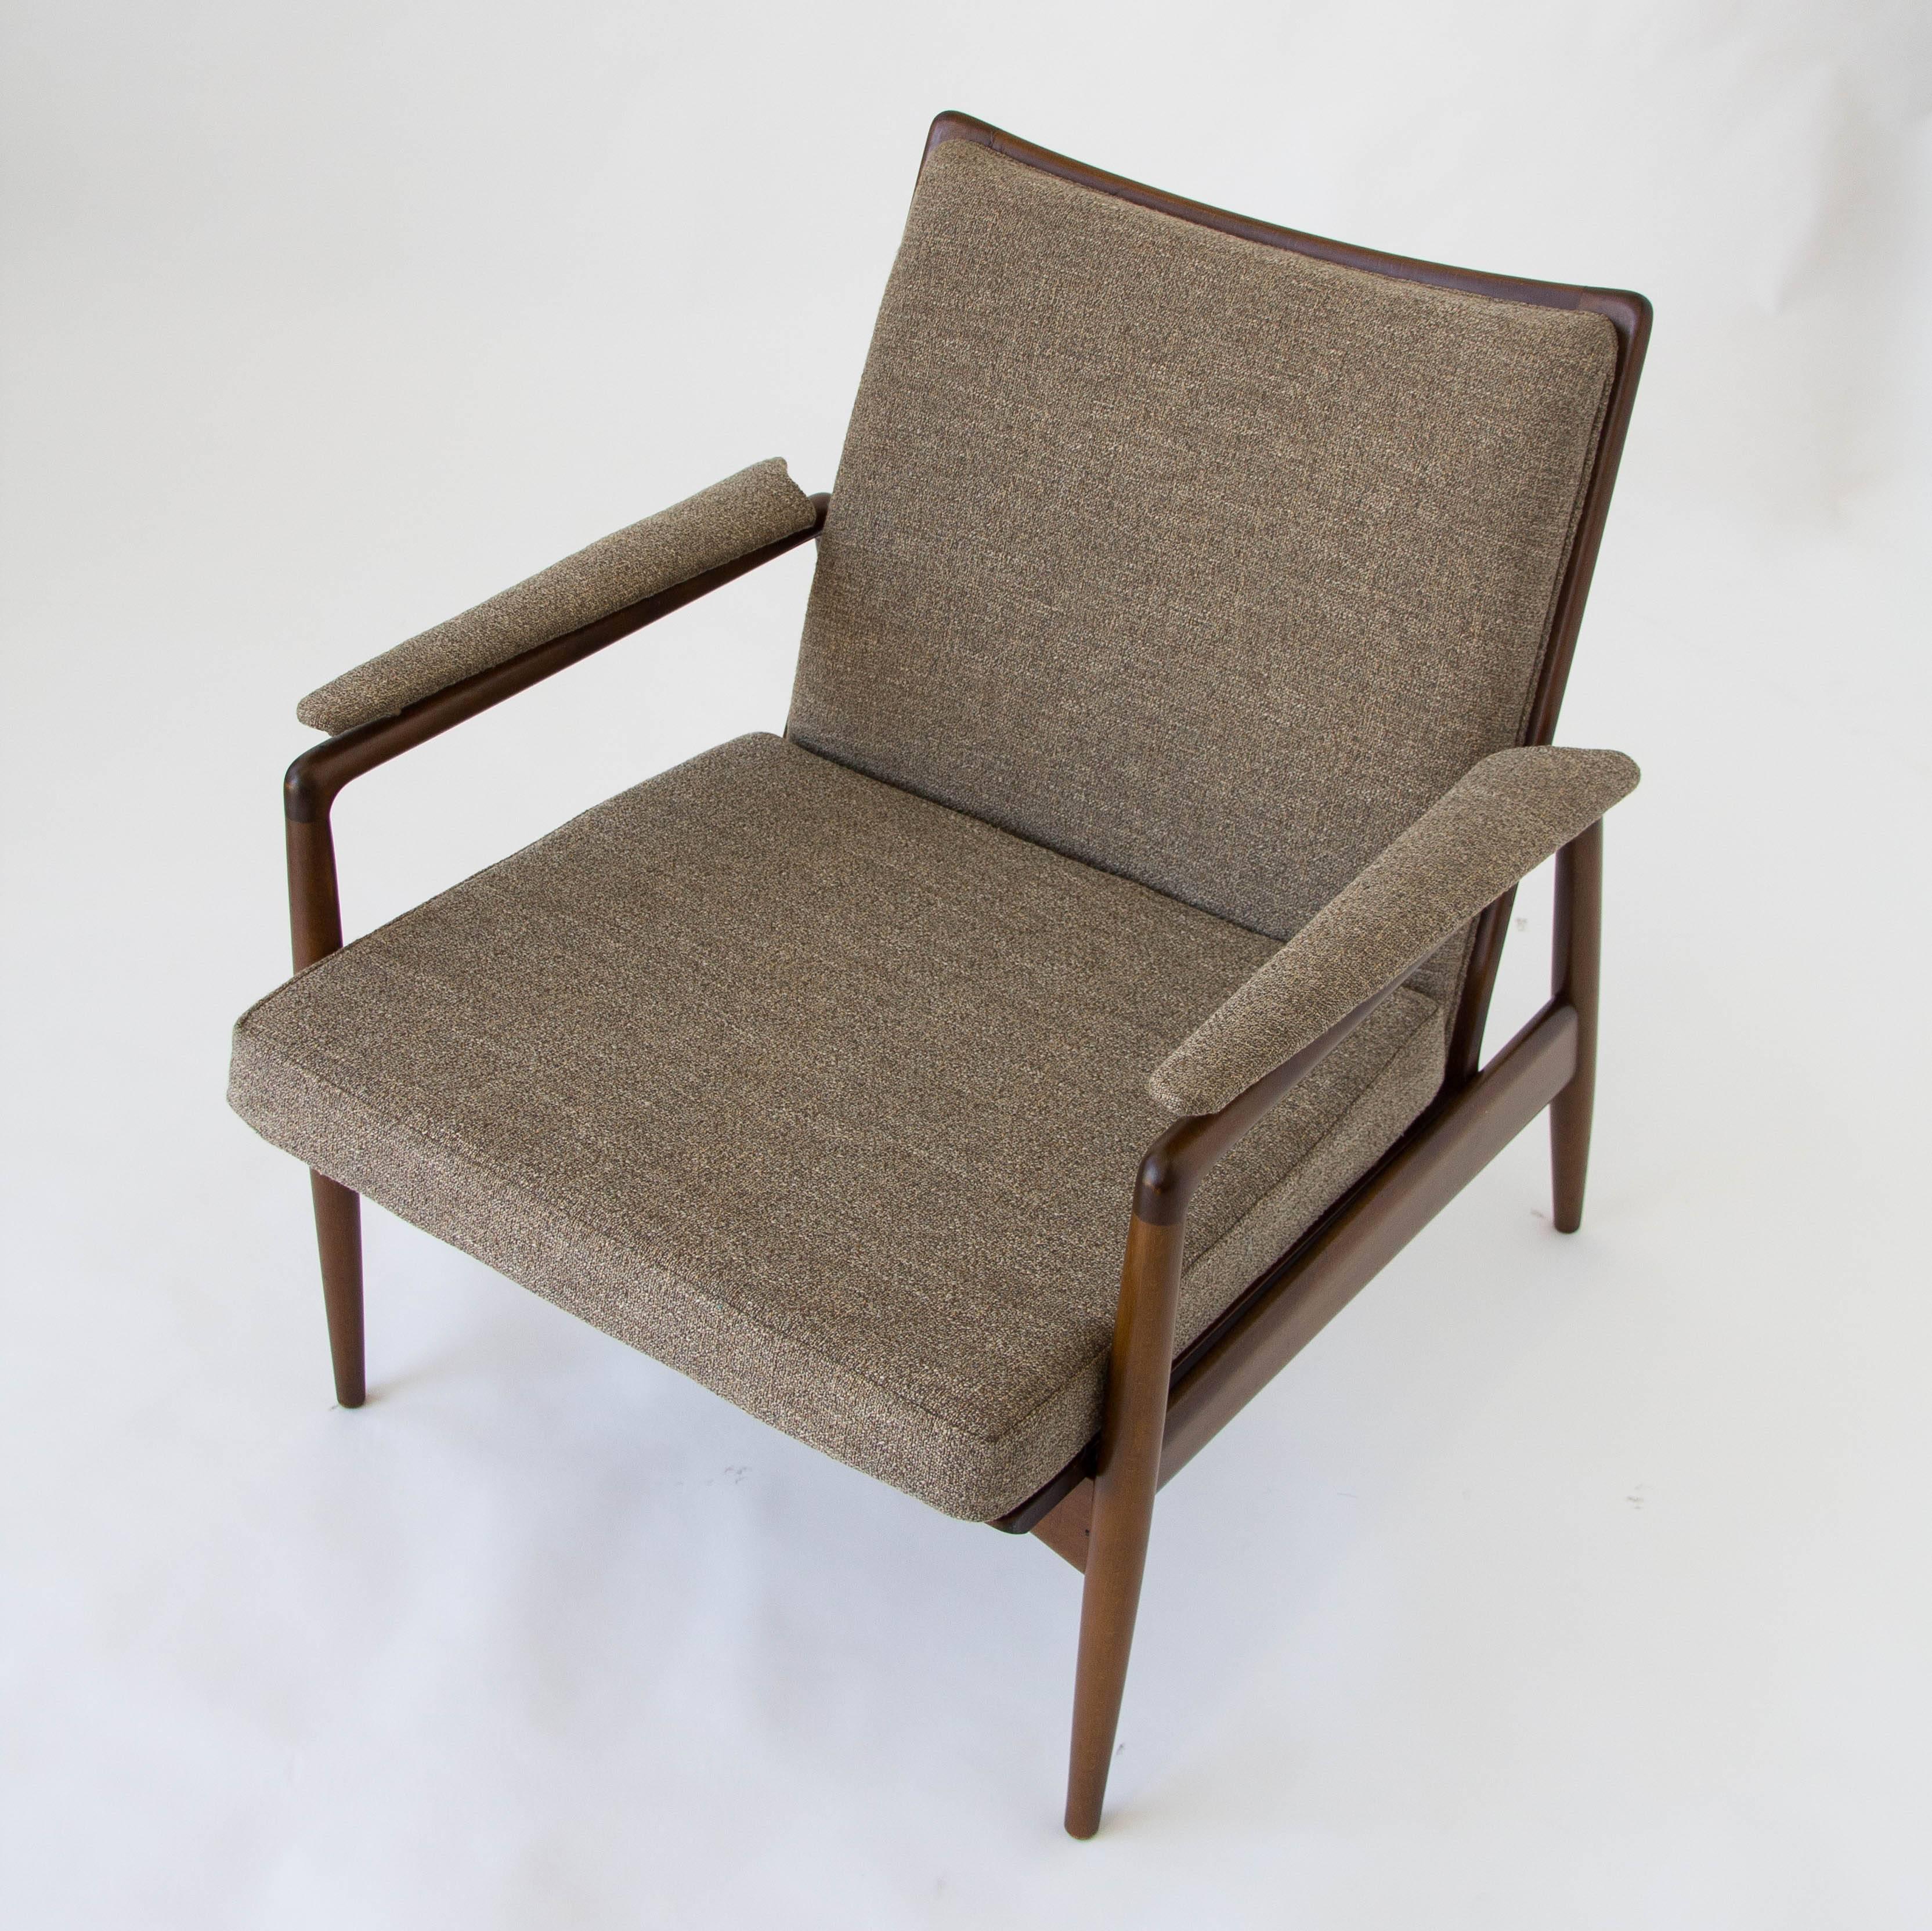 A single Selig lounge chair has a dark frame of stained beech and dove grey bouclé upholstery. The open back of the chair show the integrated backrest from either side. The matching upholstered armrests appear to float over the chair frame. The red